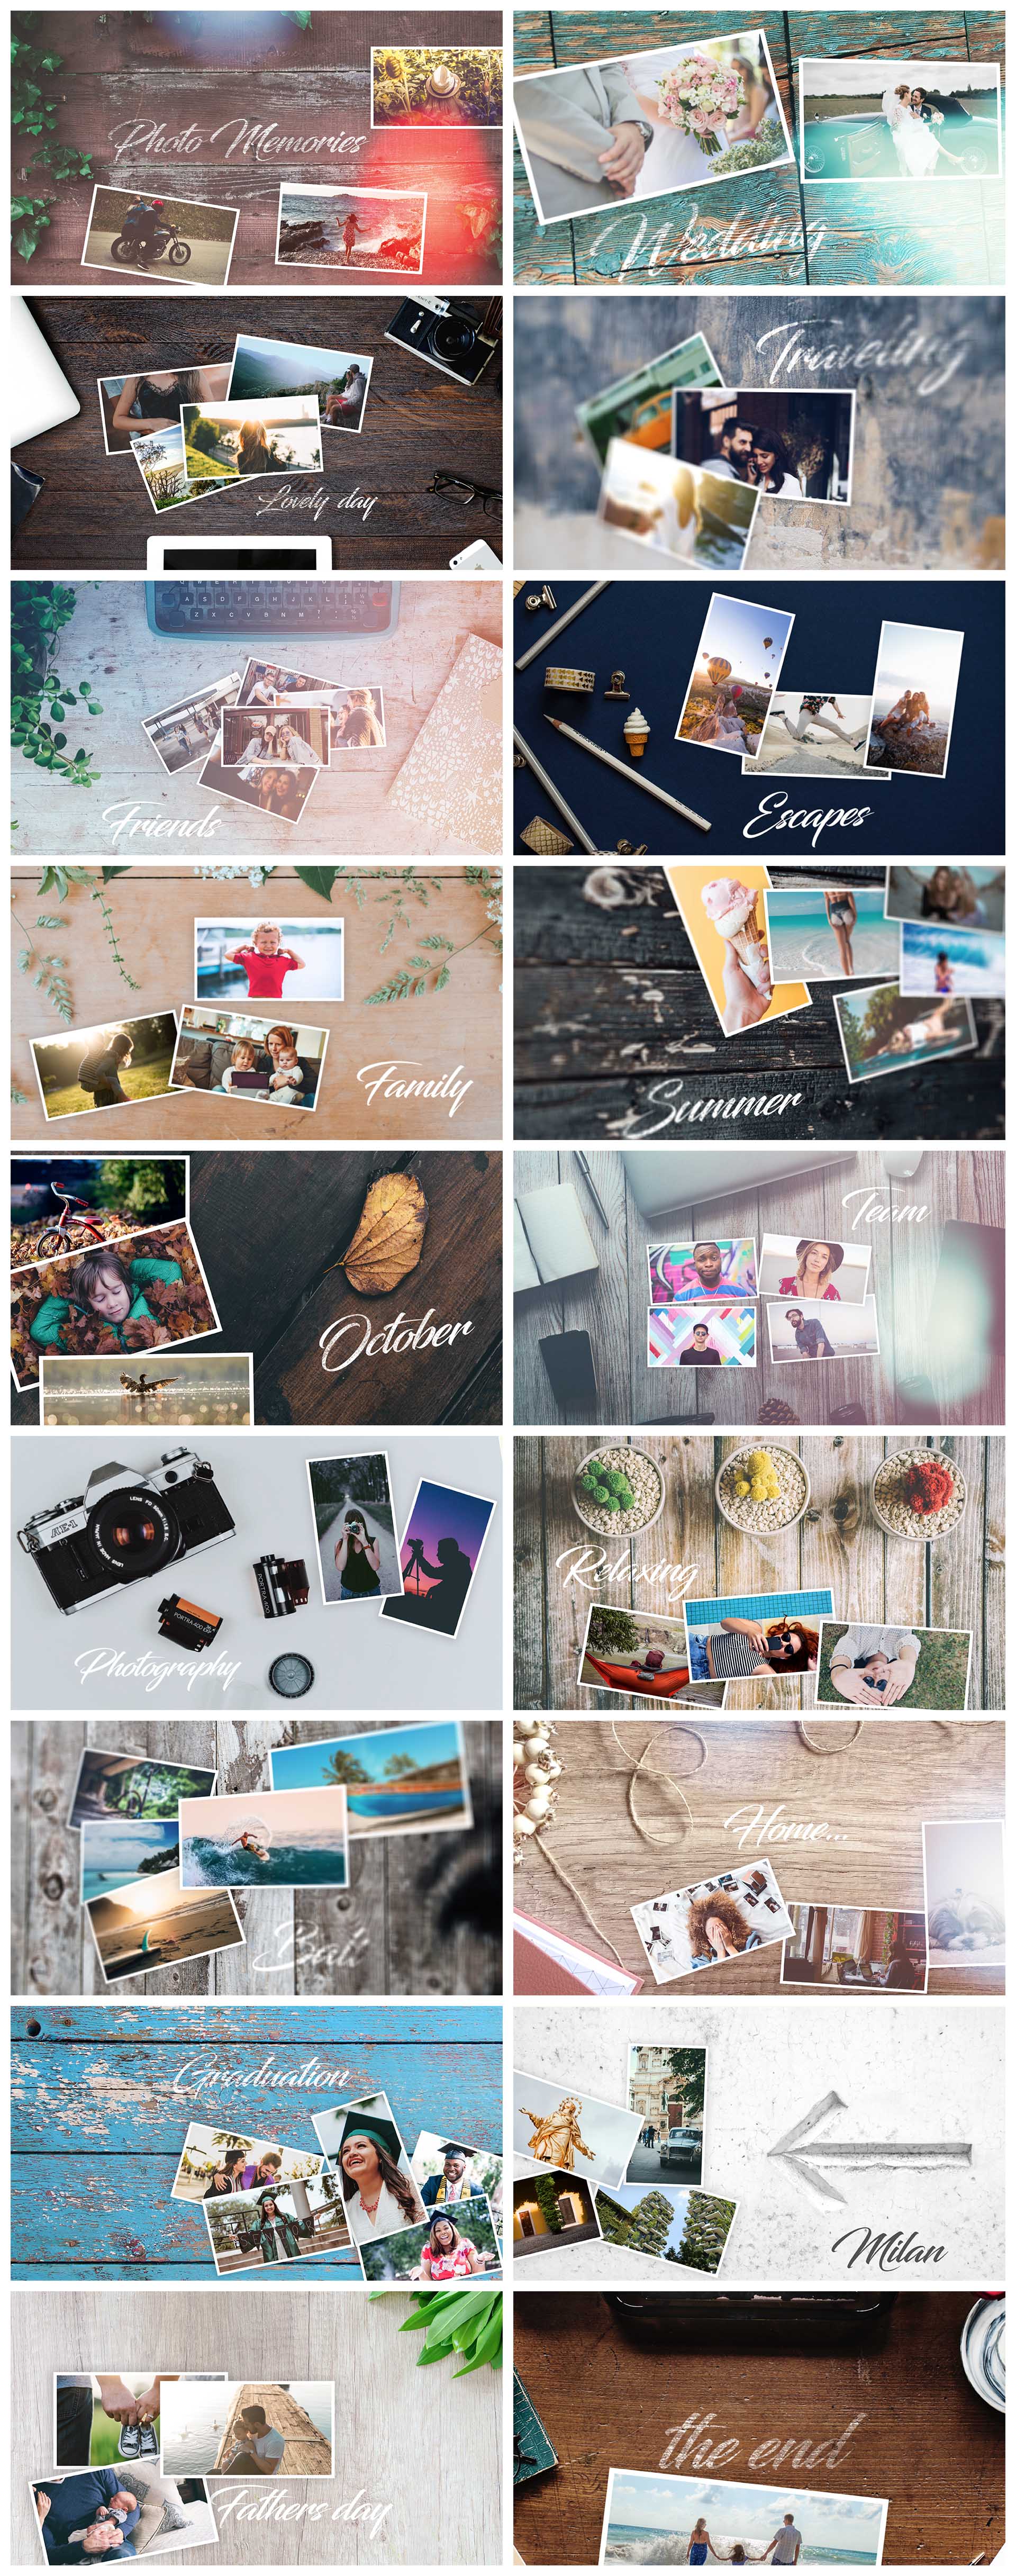 photo gallery memories after effects template free download